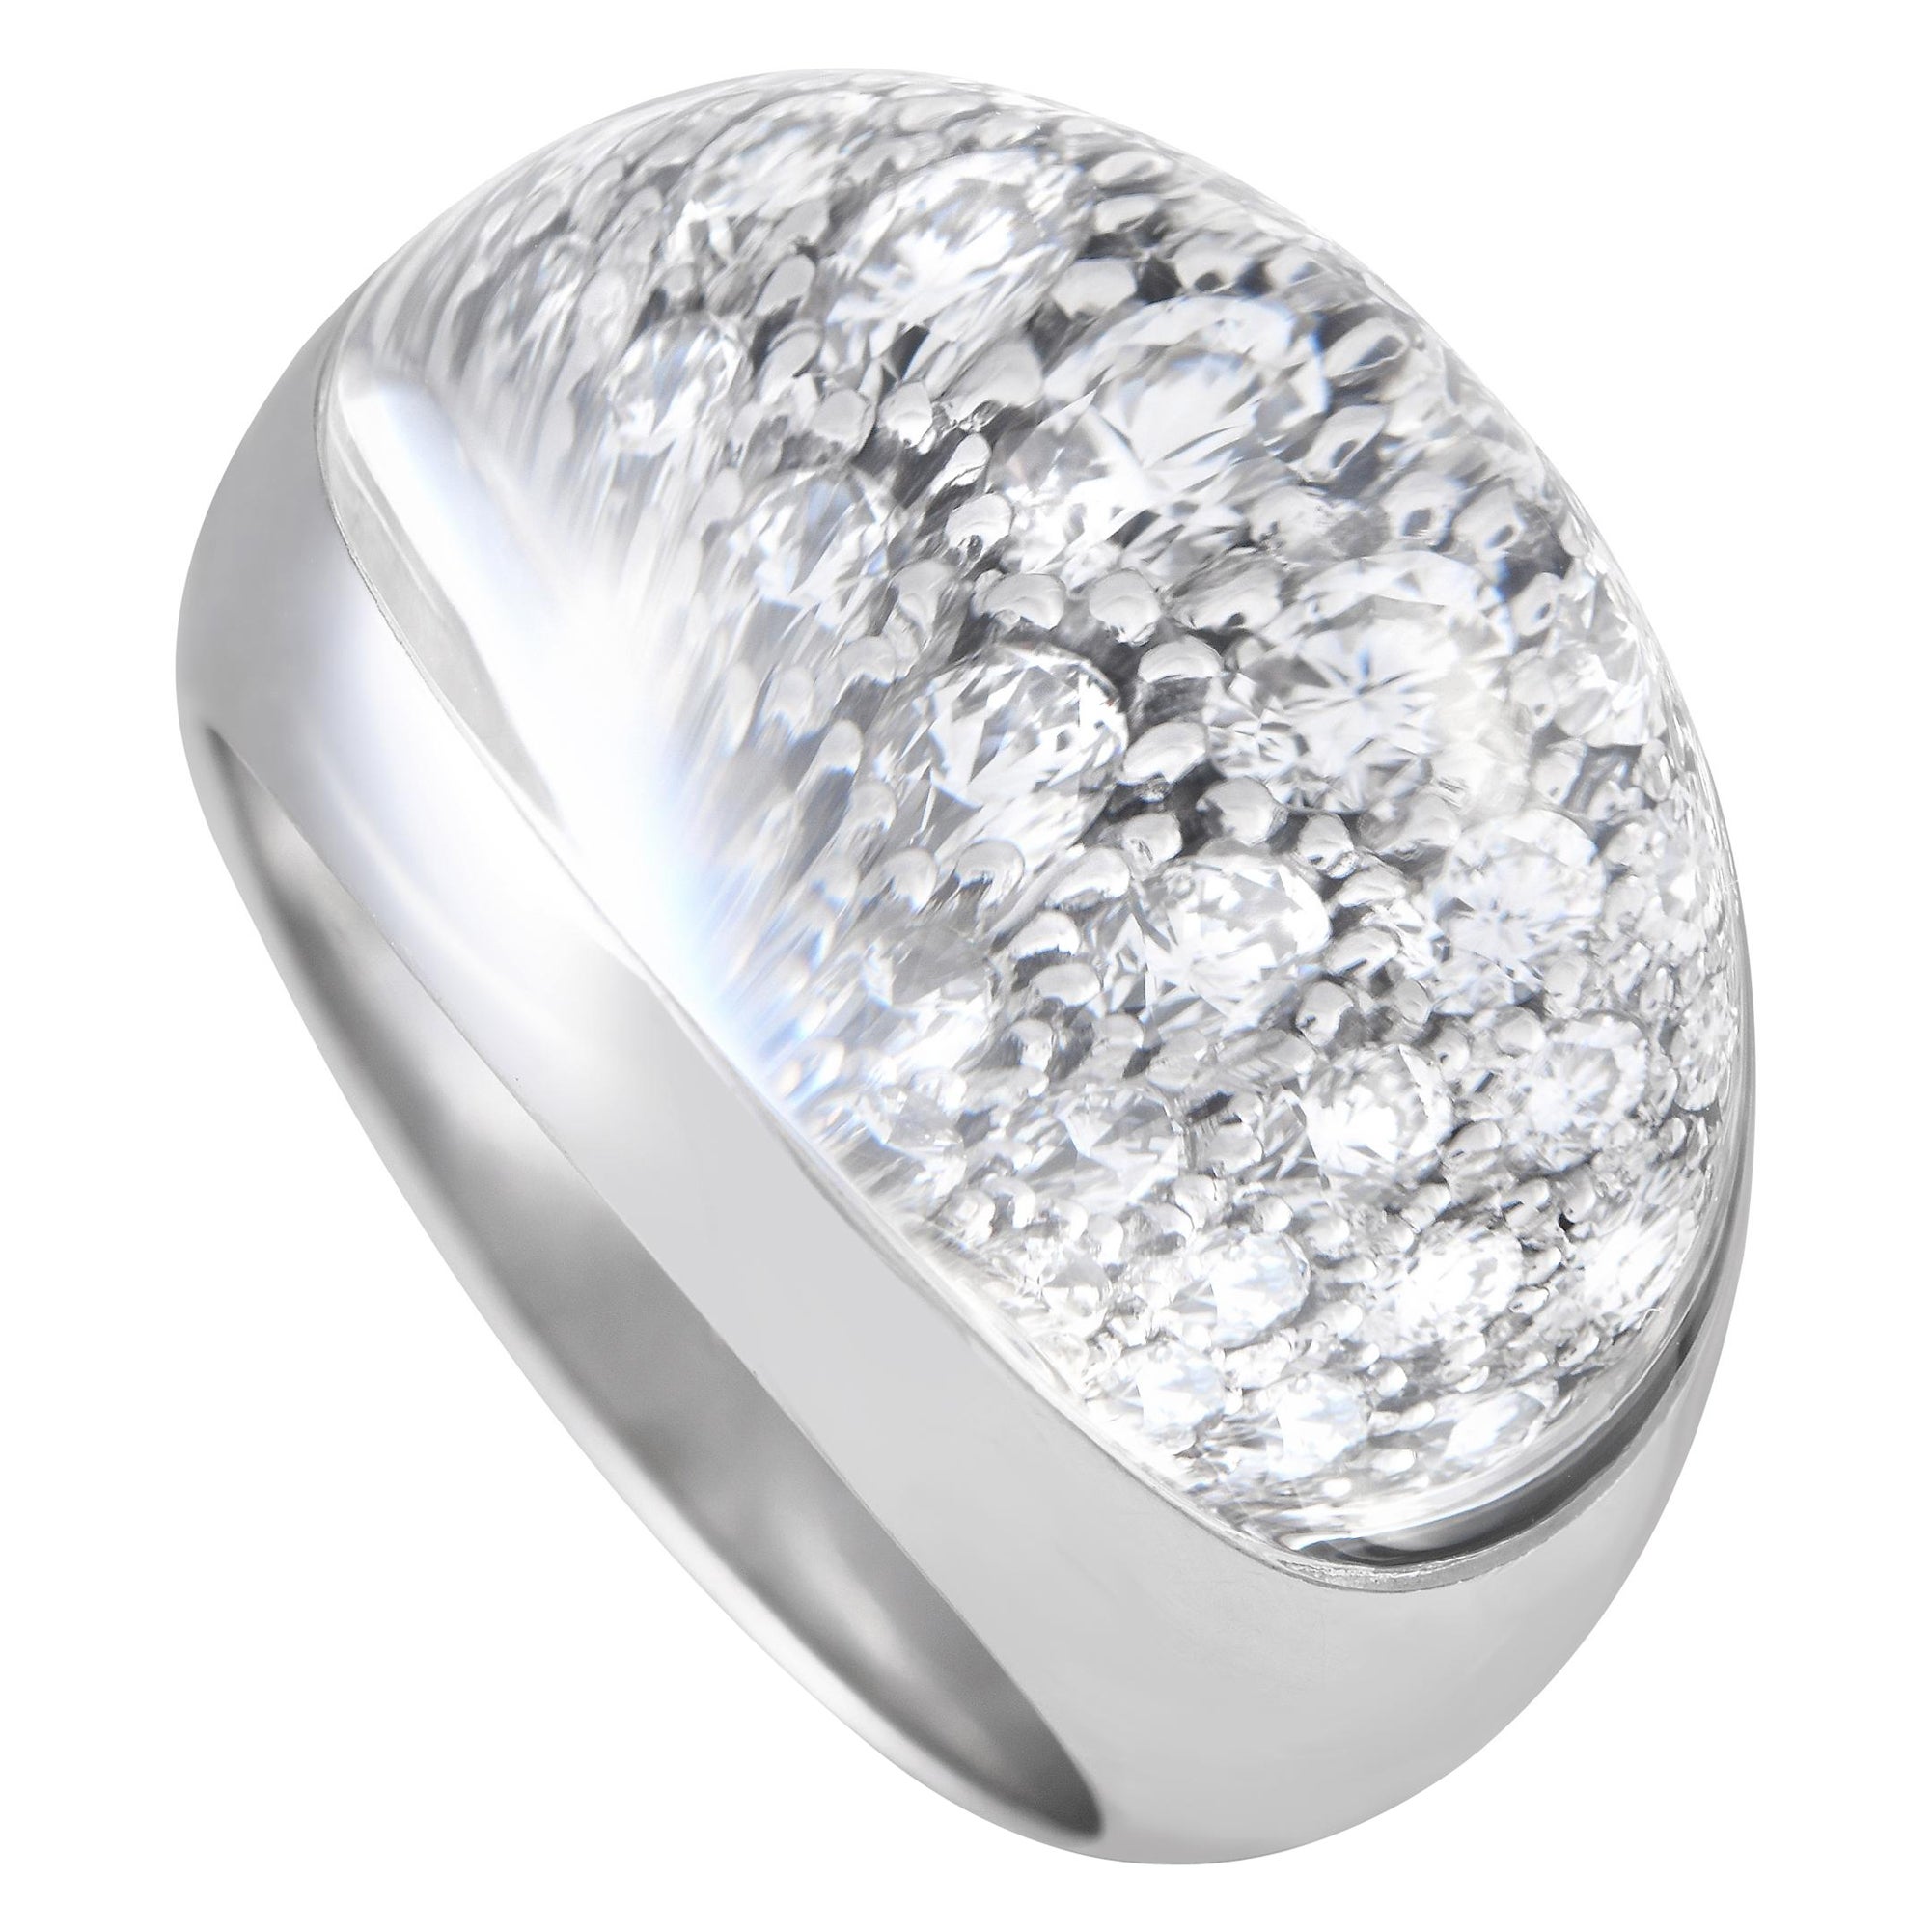 Cartier Myst 18K White Gold 1.0ct Diamond and Rock Crystal Ring